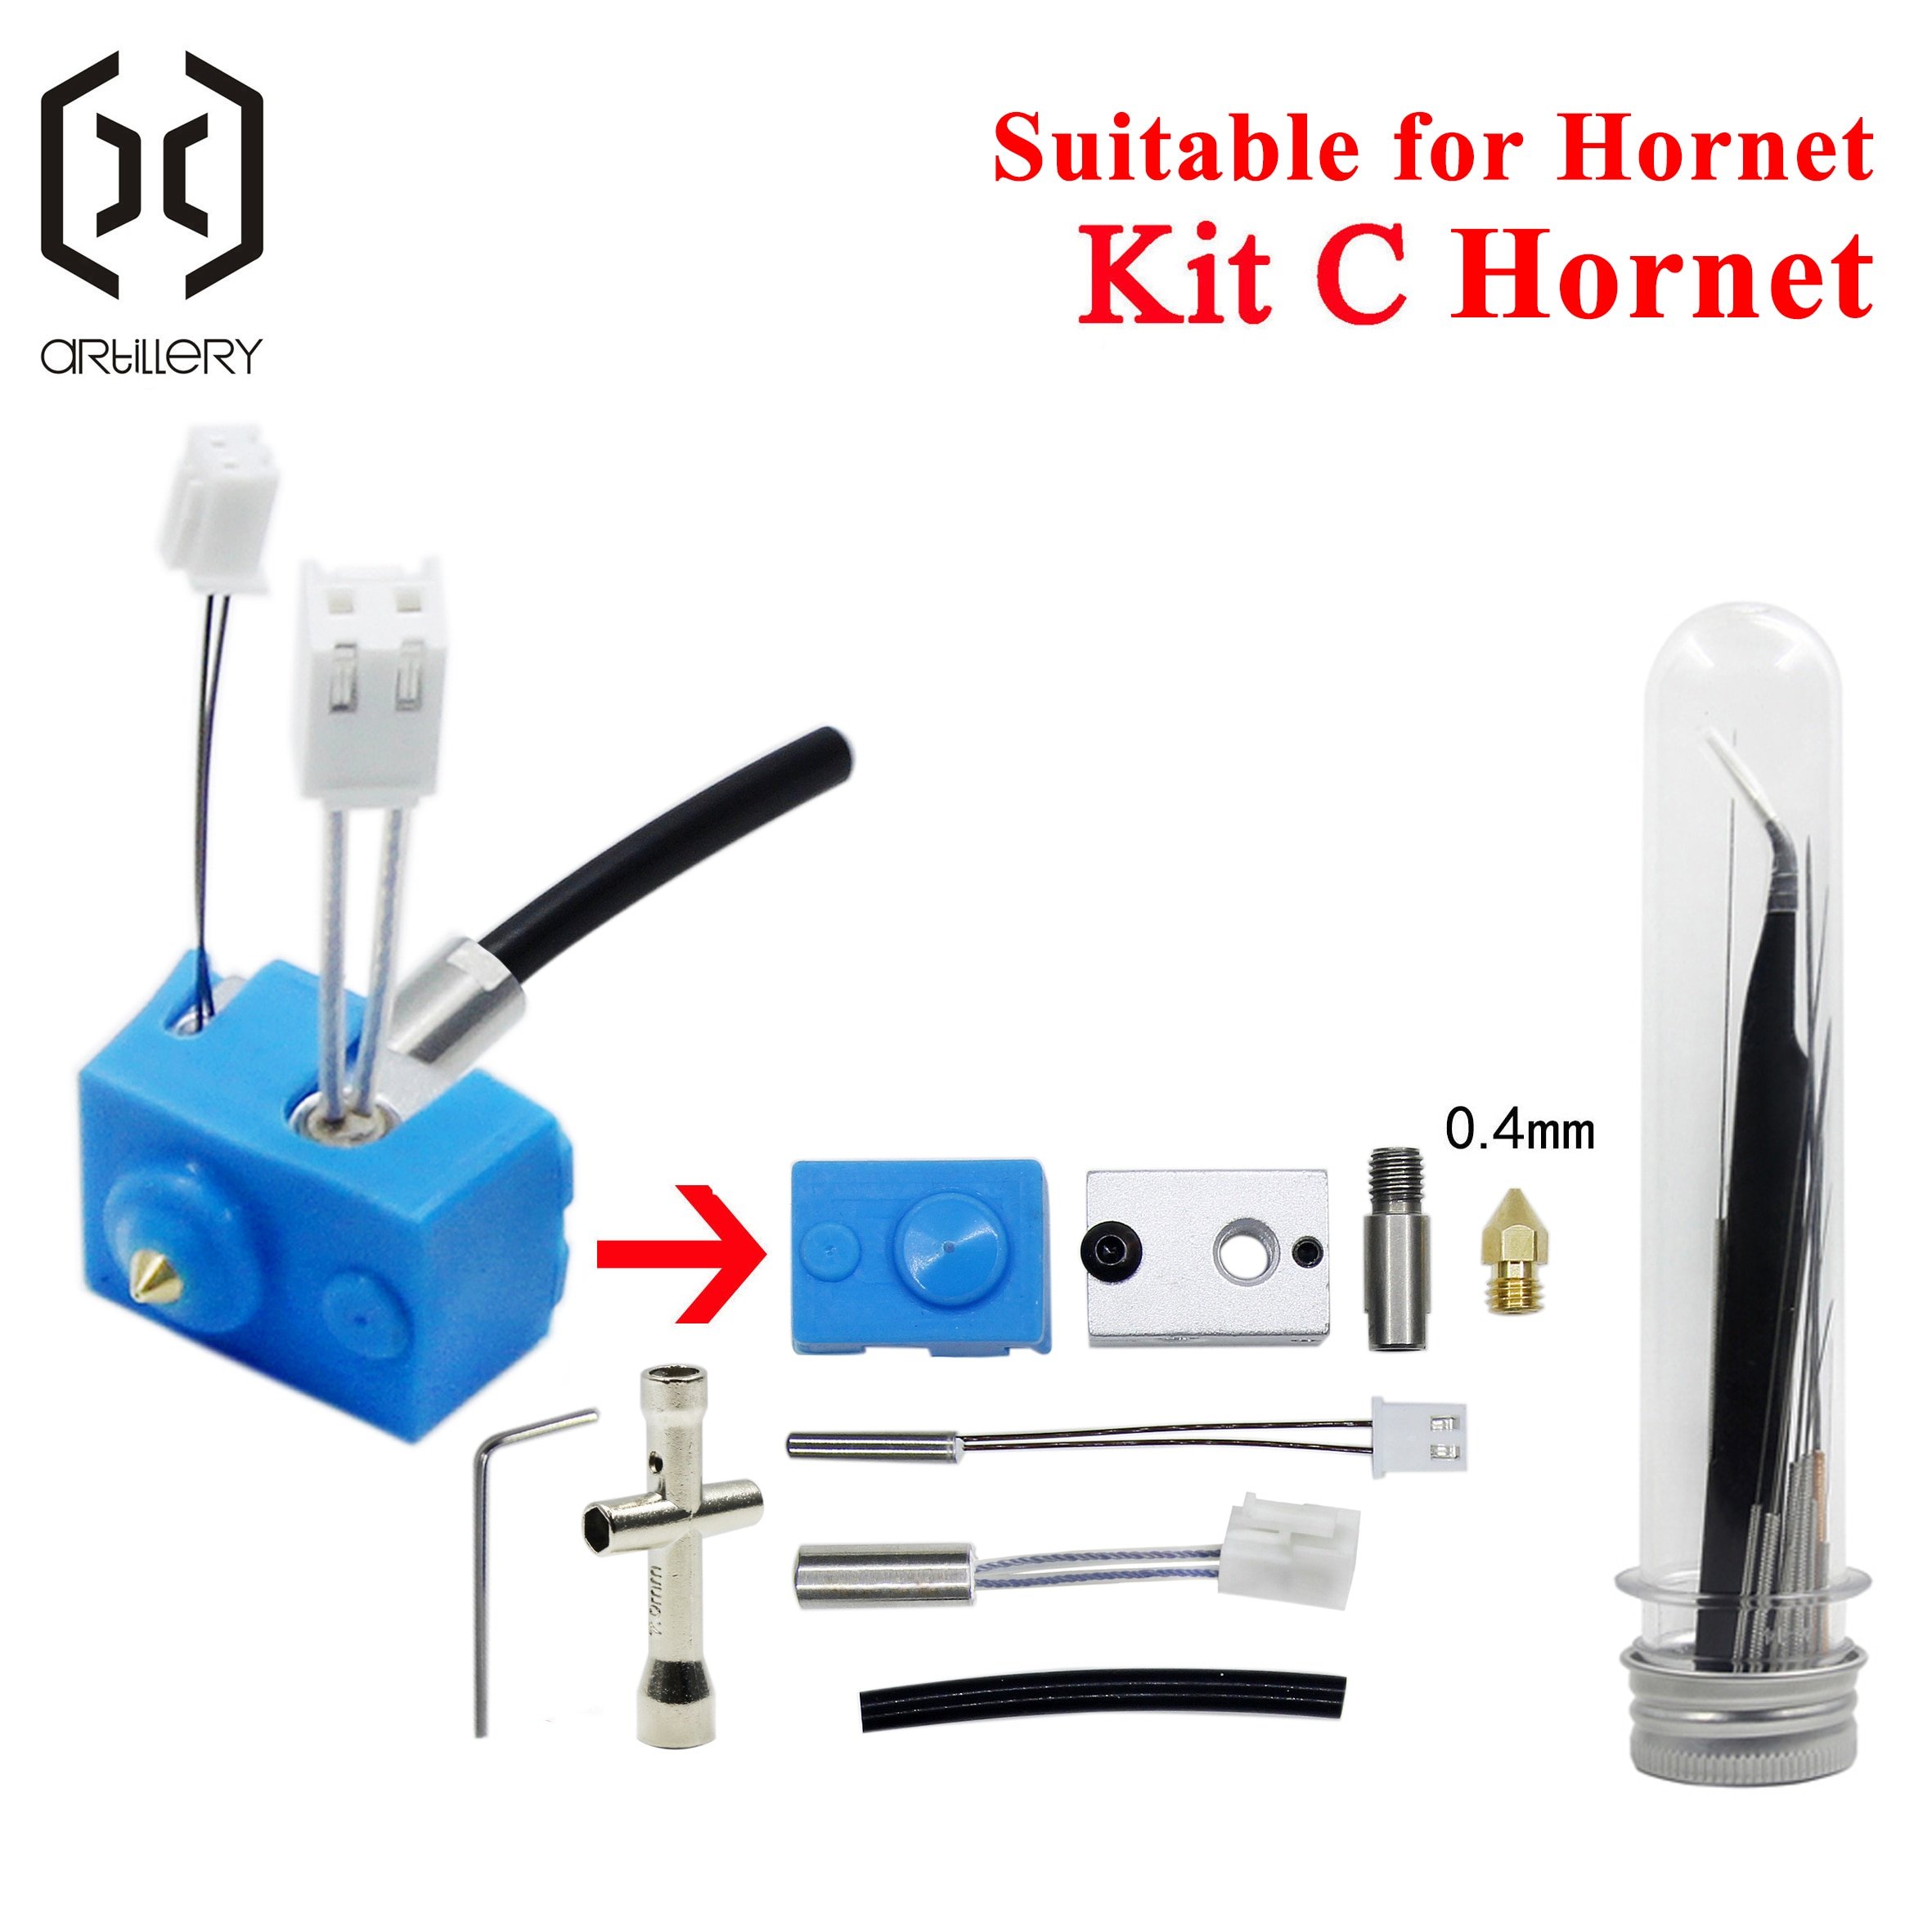 3D printer Artillery extruder Sidewinder X1 Genius and Hornet silicone nozzle kit heating block throat and thermistor idler arm: Kit C Hornet